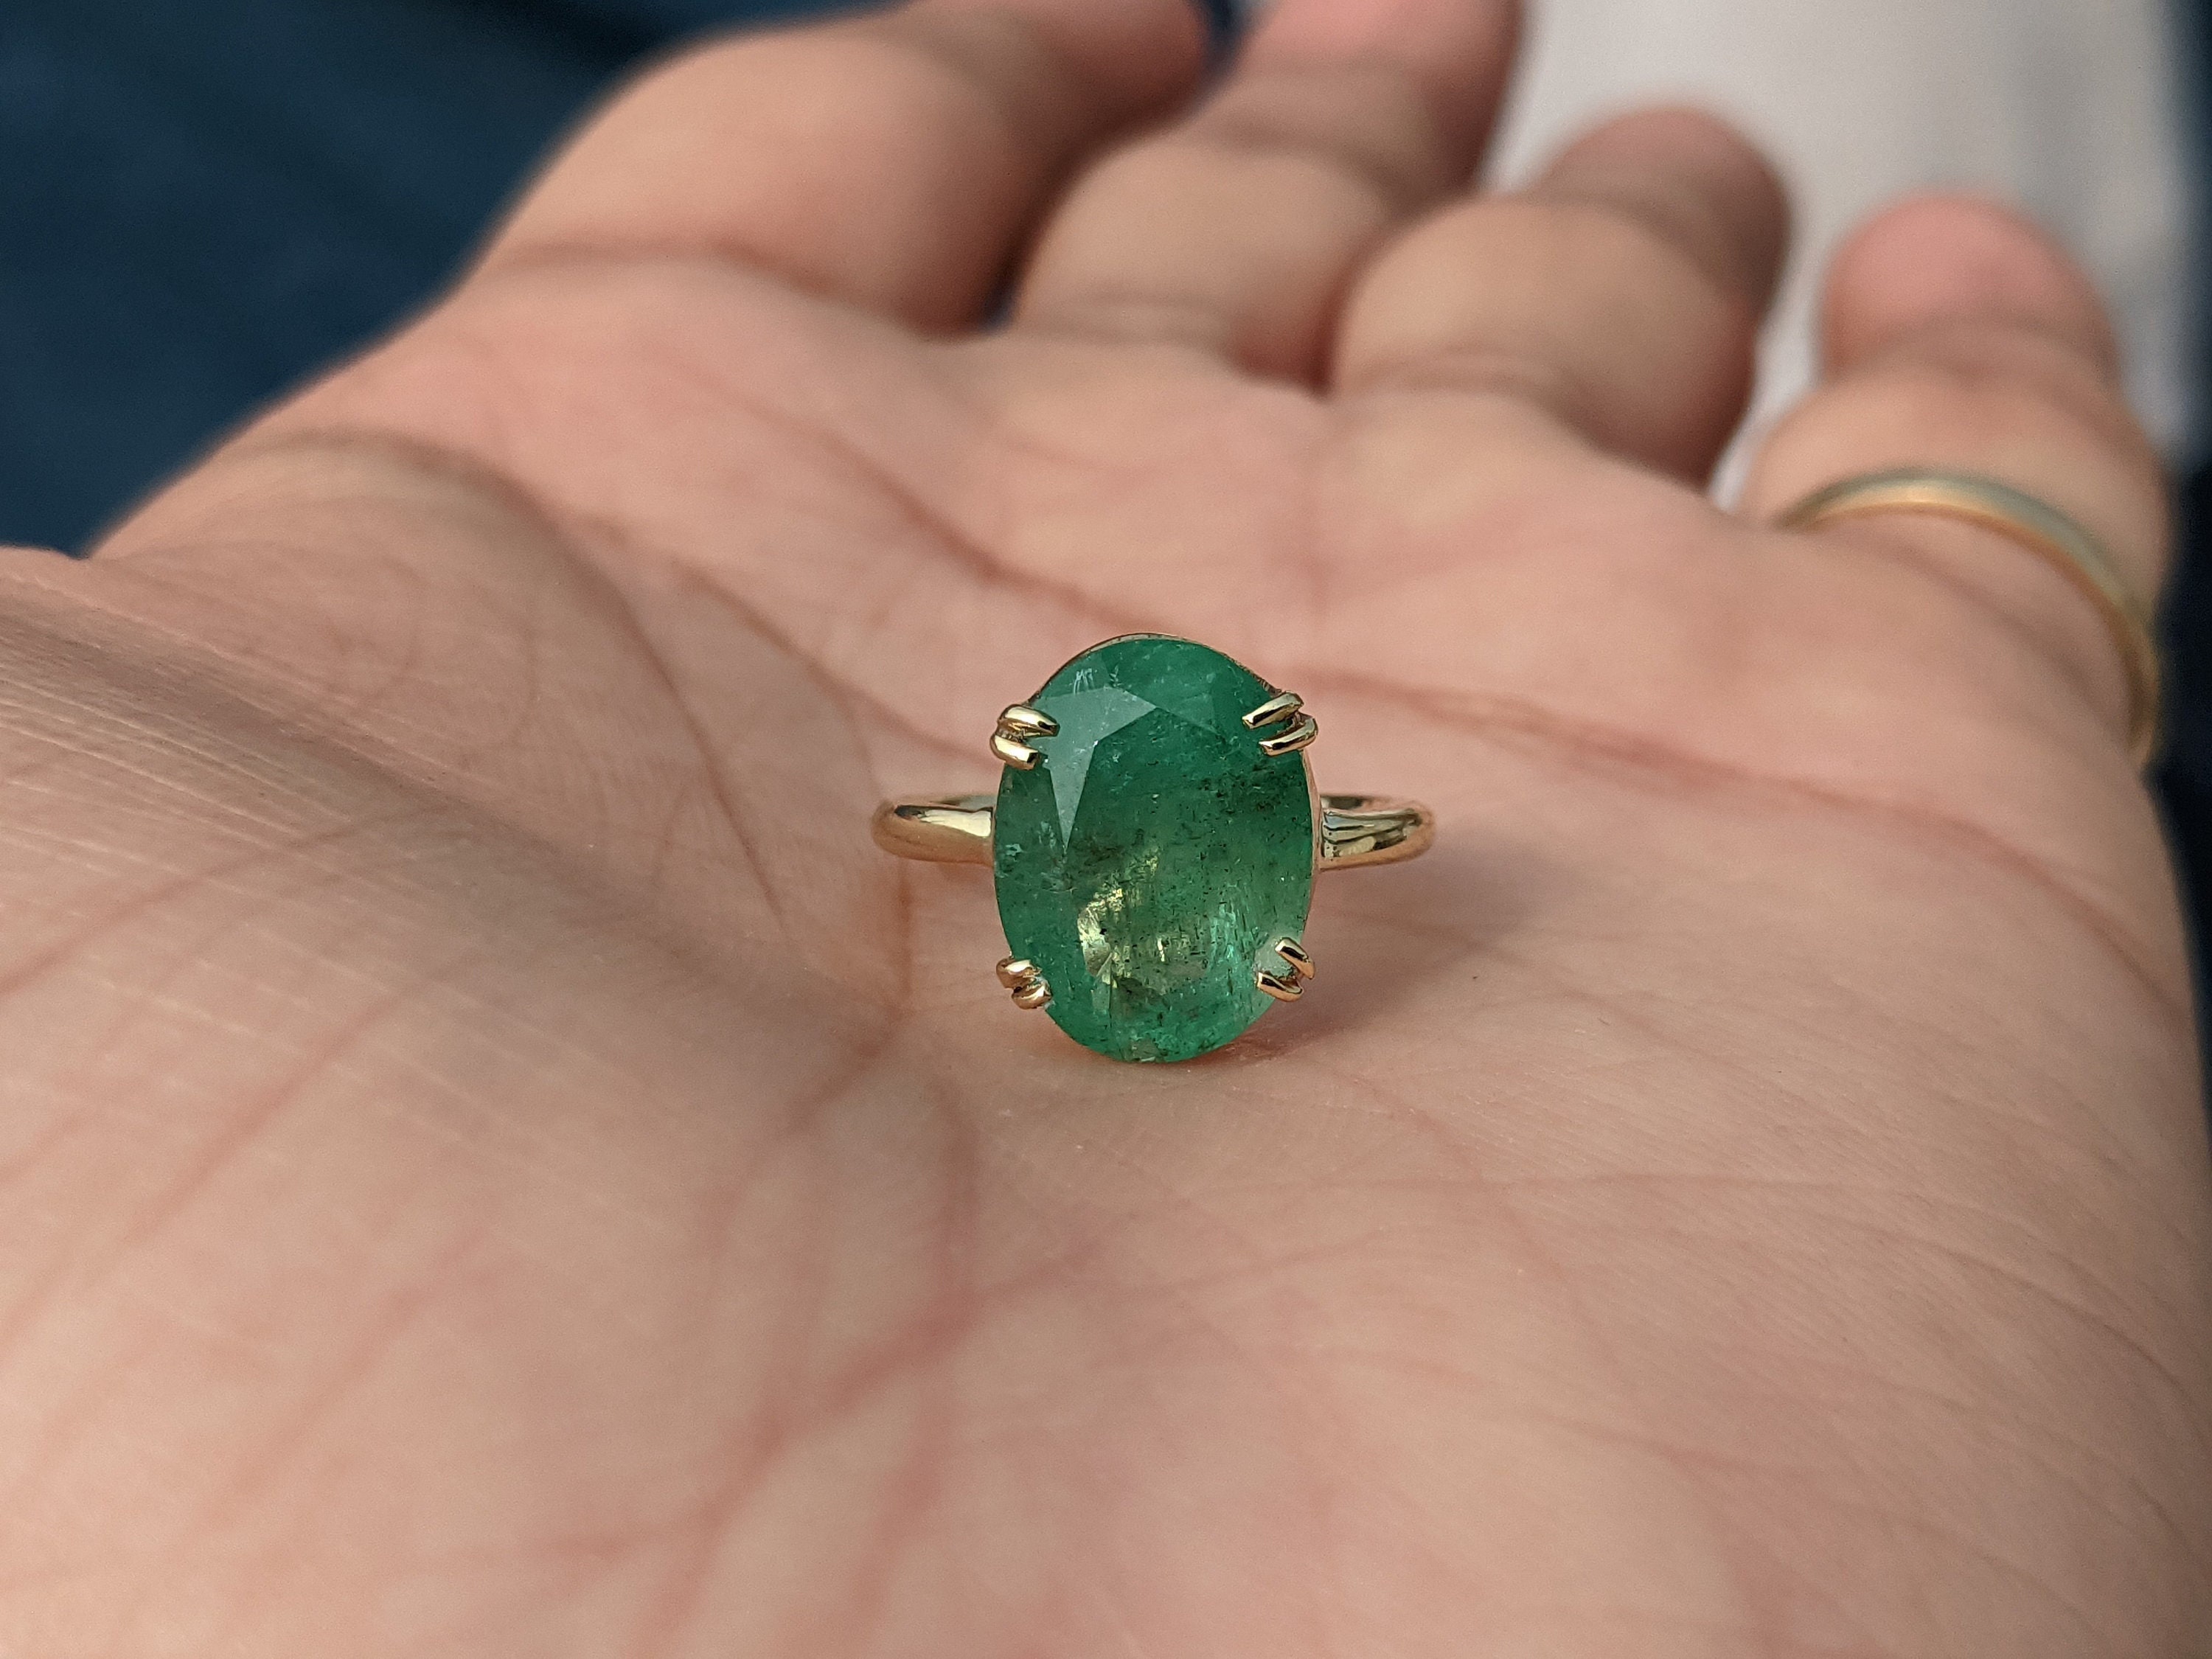 Buy Natural 5 Carat Emerald Panna, 925 Sterling Silver, Handmade Ring for  Men and Woman, Christmas Gift. Online in India - Etsy